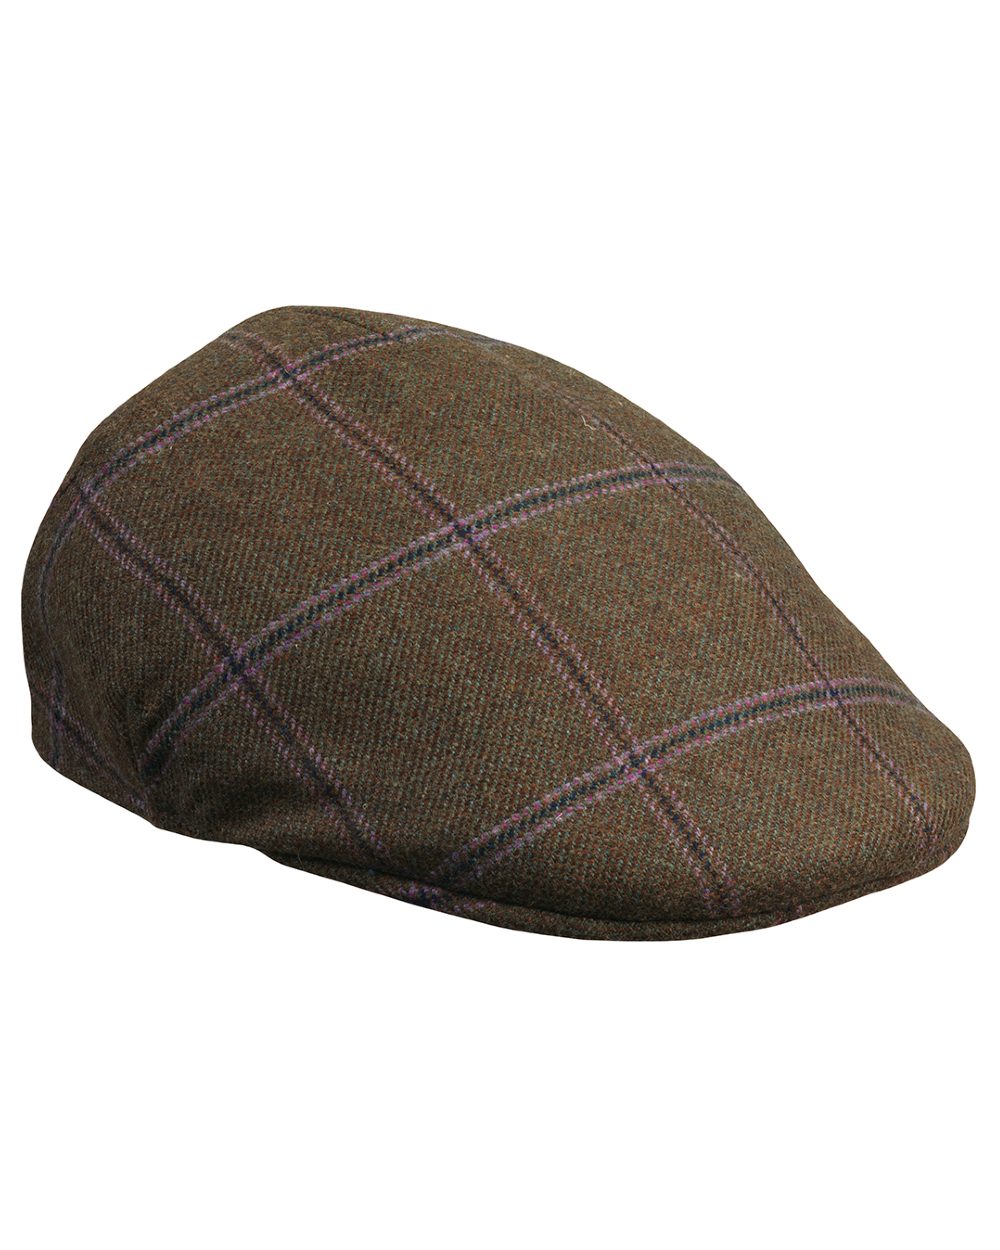 Laksen Pippa Drivers Flat Cap On A White Background